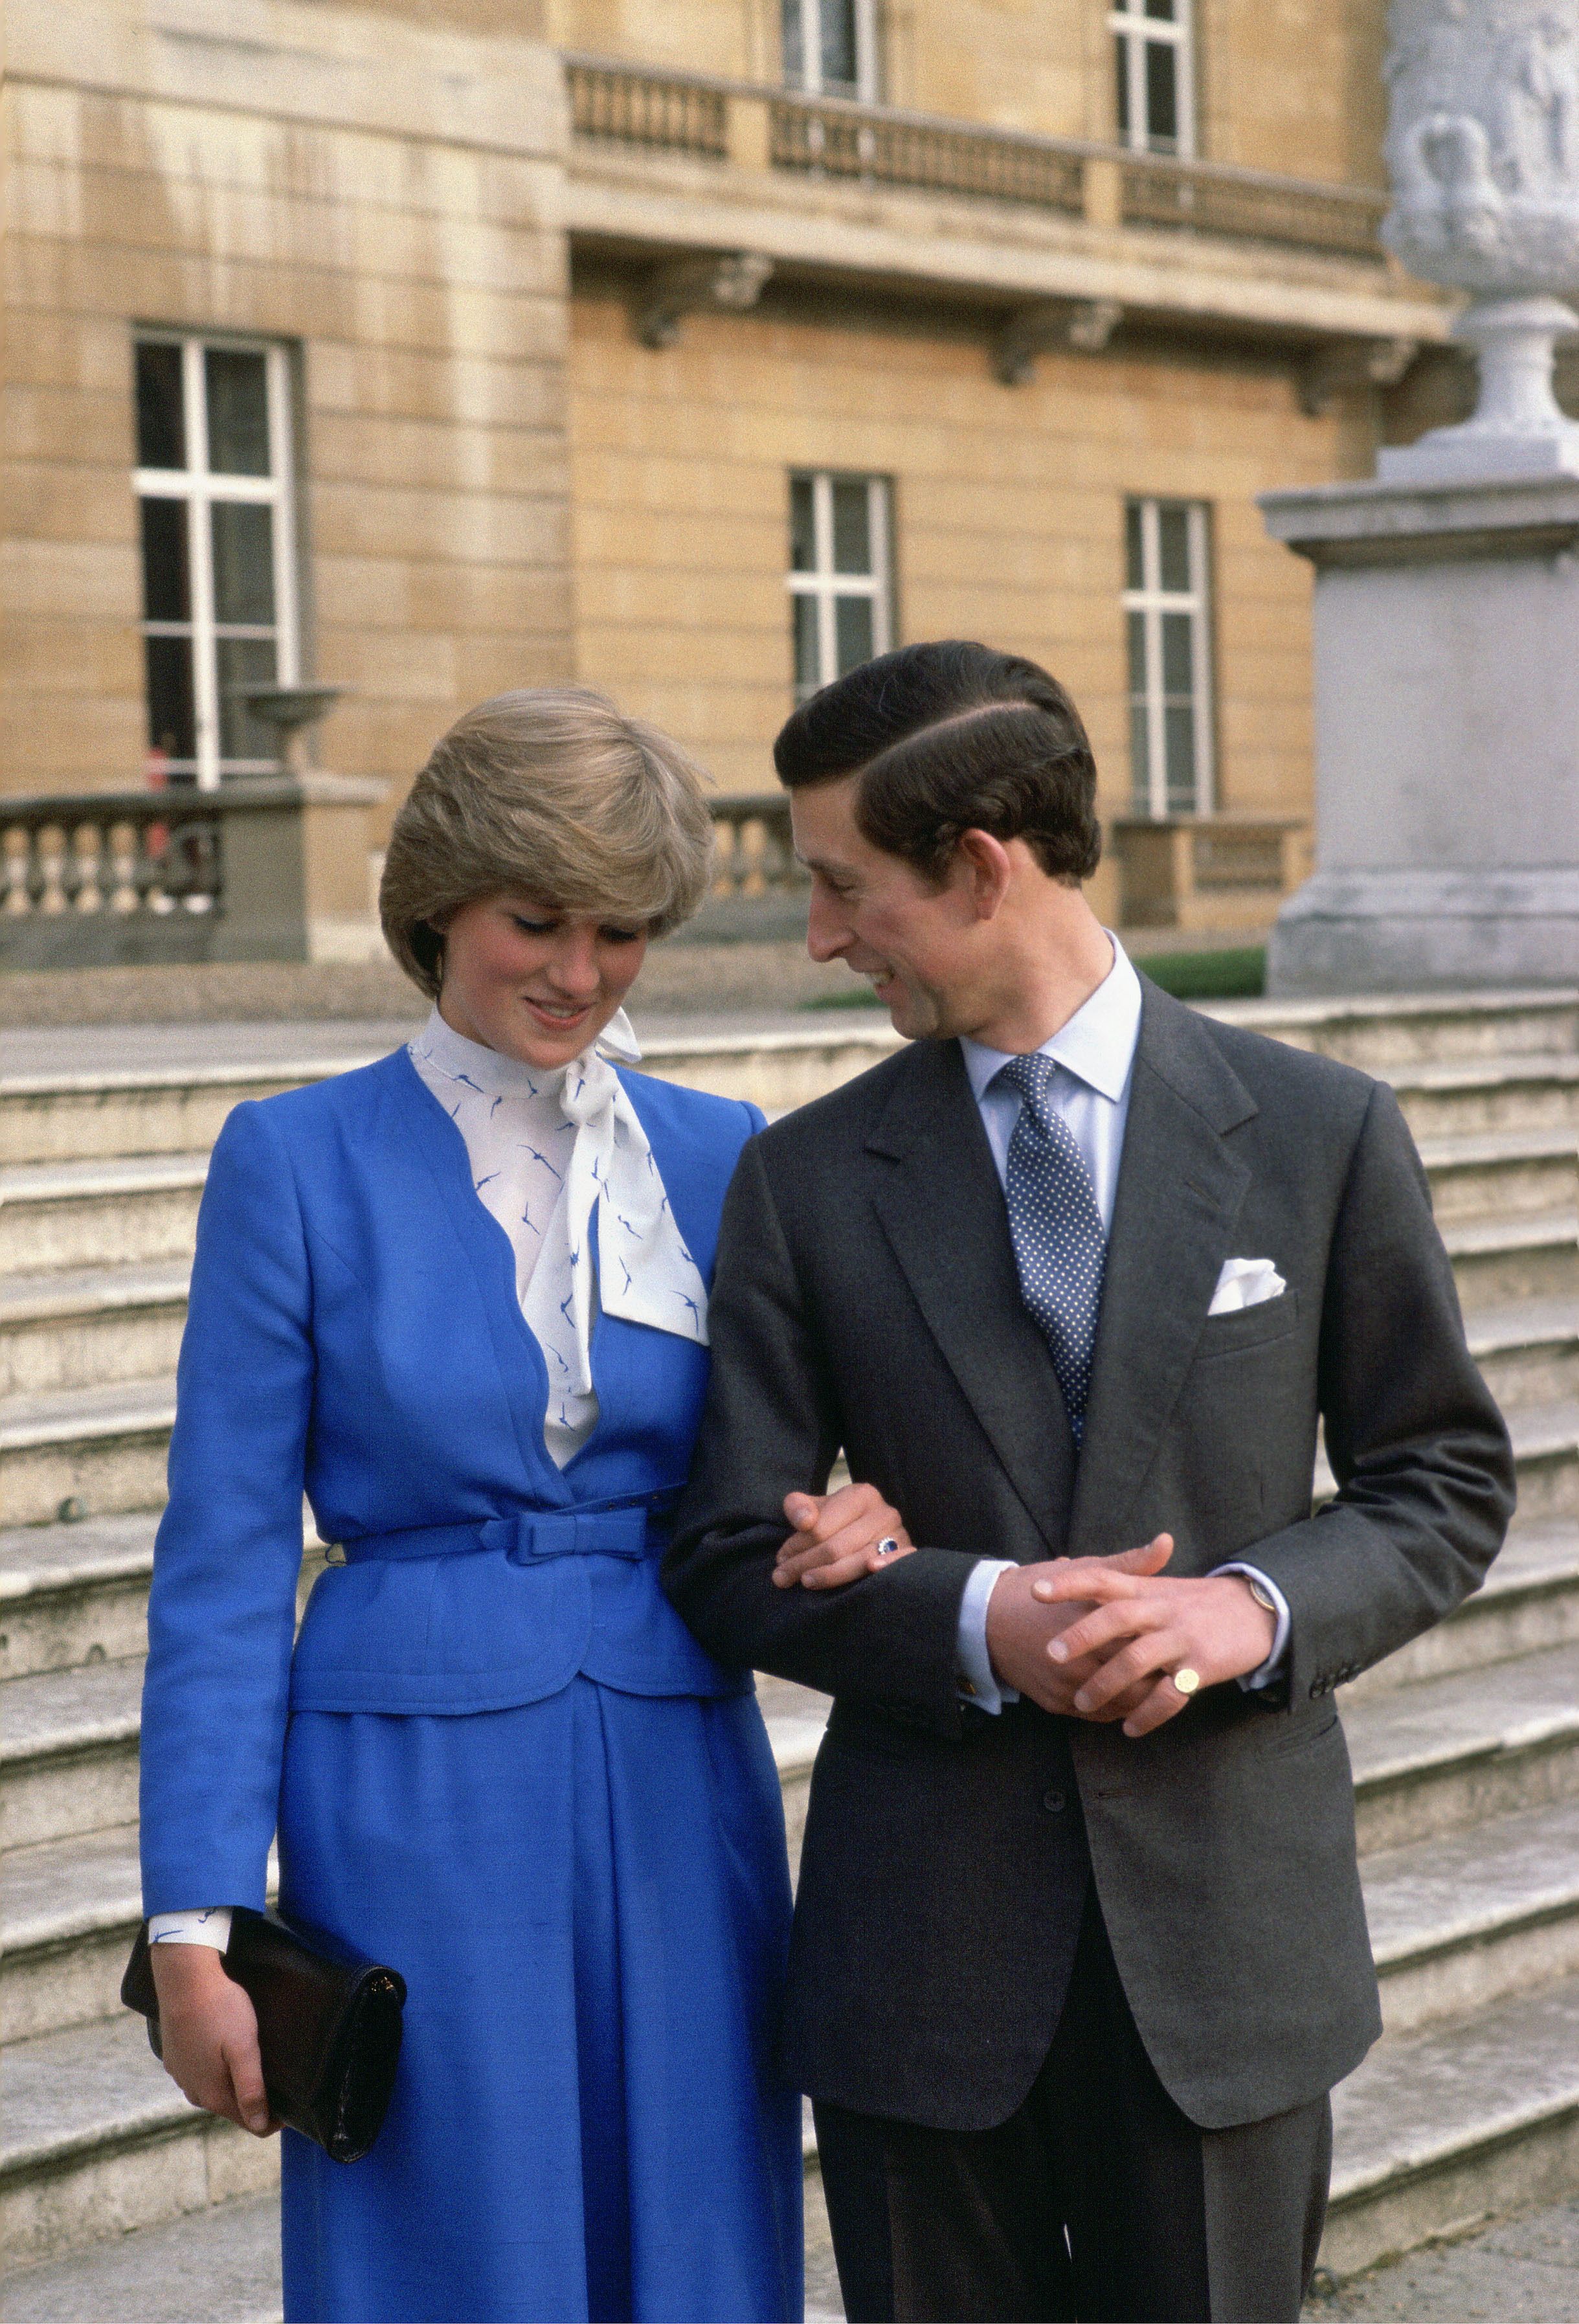 How Did Prince Charles and Princess Diana Meet? - The True Story